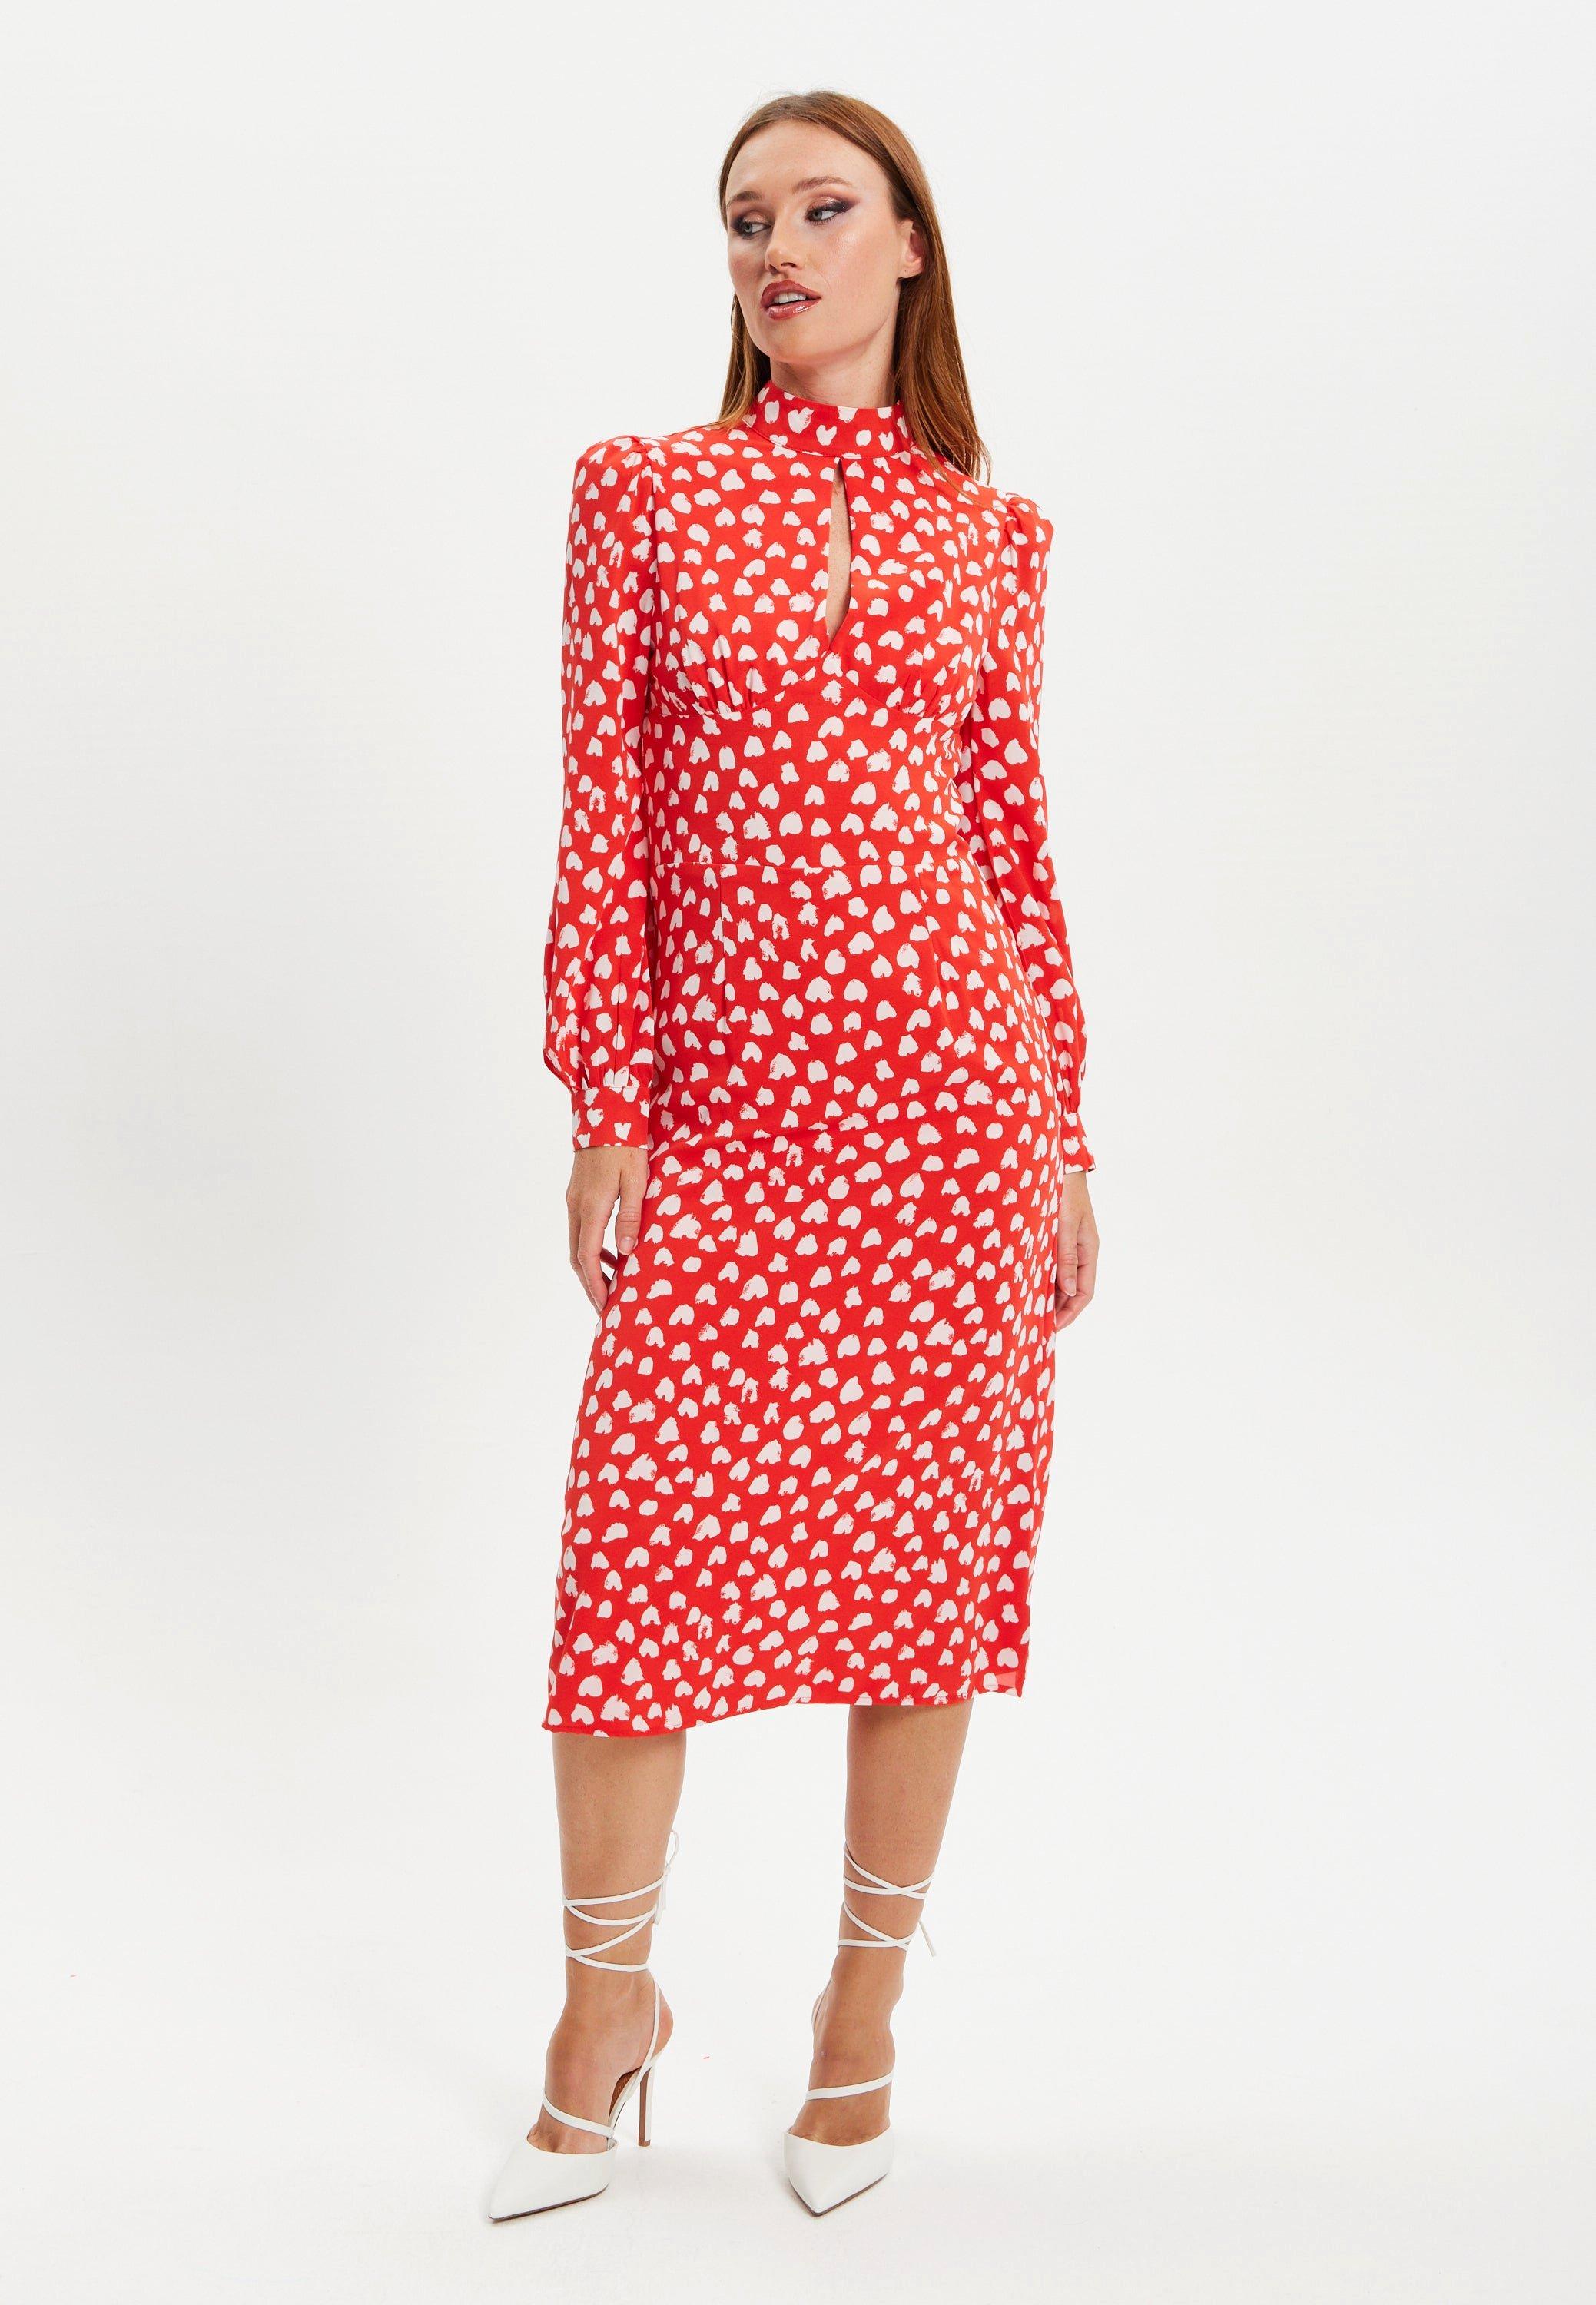 Heart Print Midi Dress In Red With Slit On Neckline